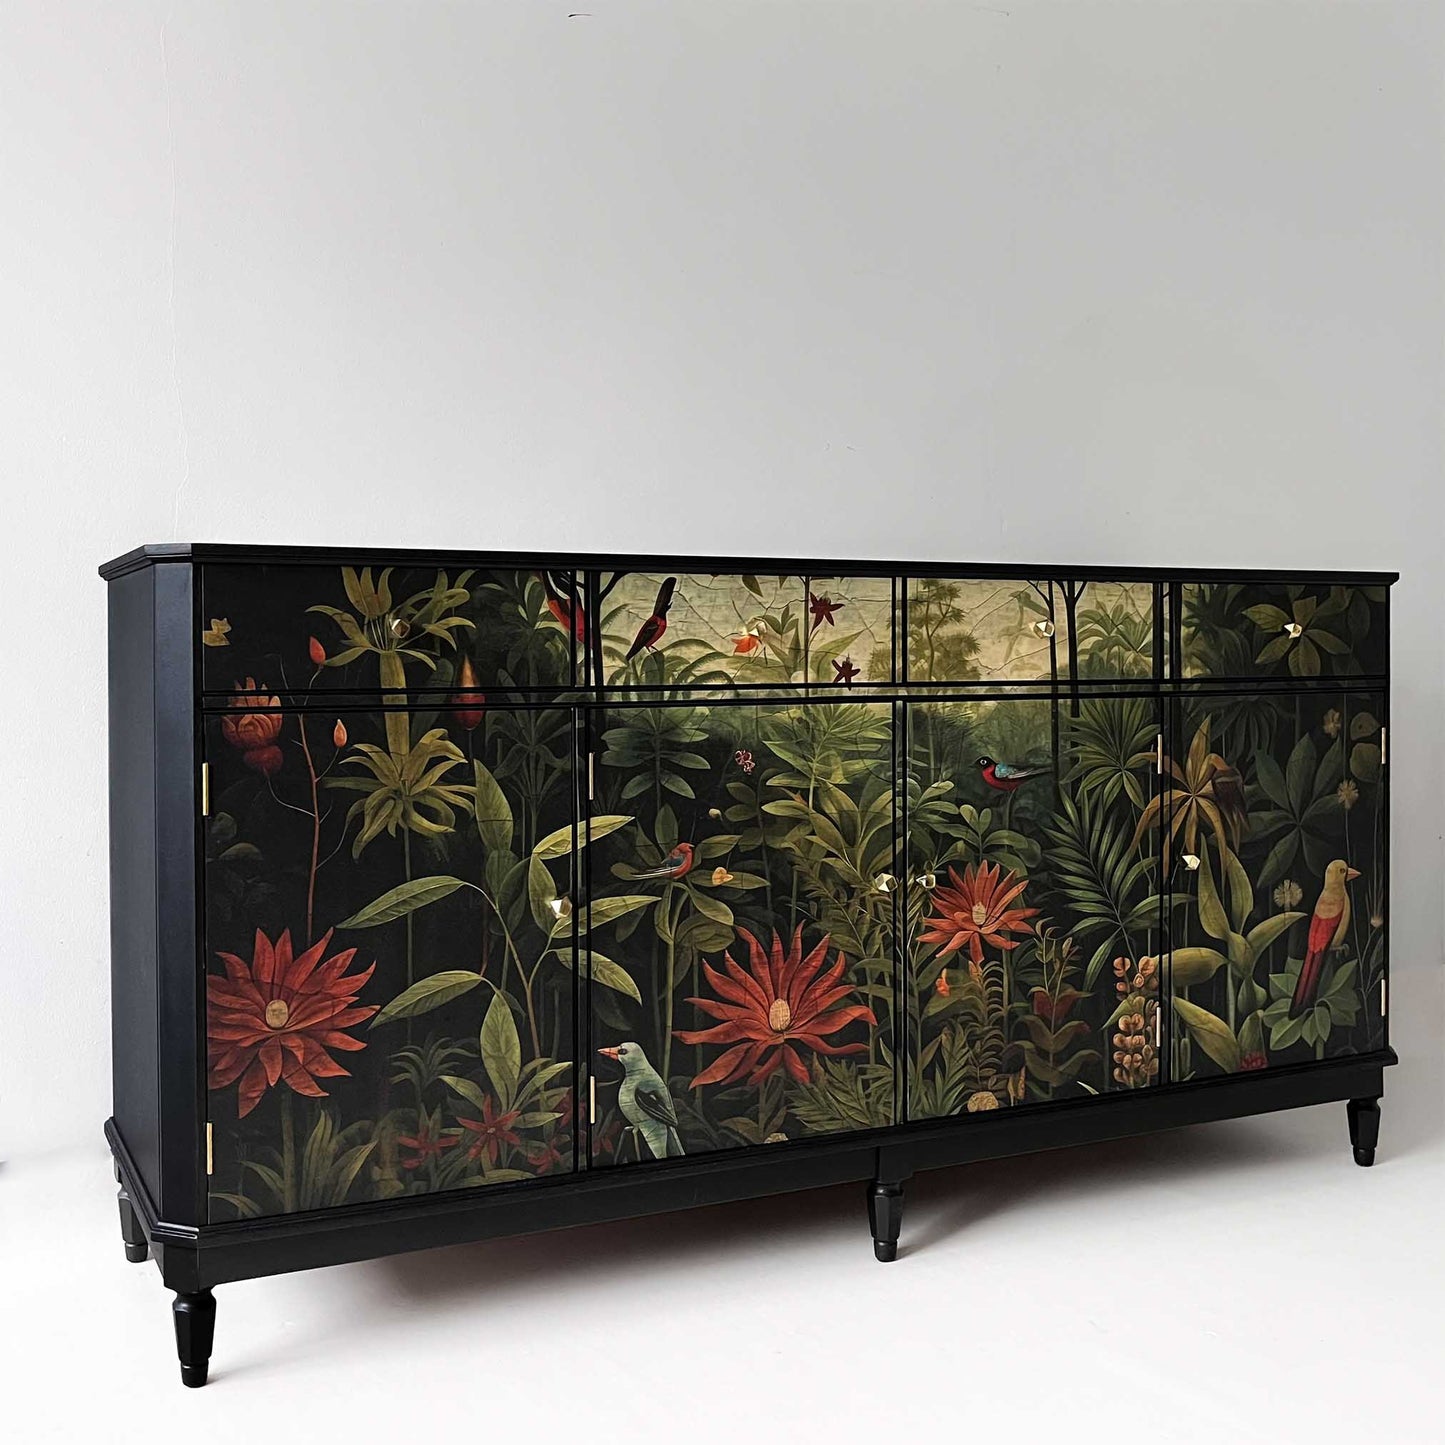 Antique black painted sideboard with opulent Jungle design